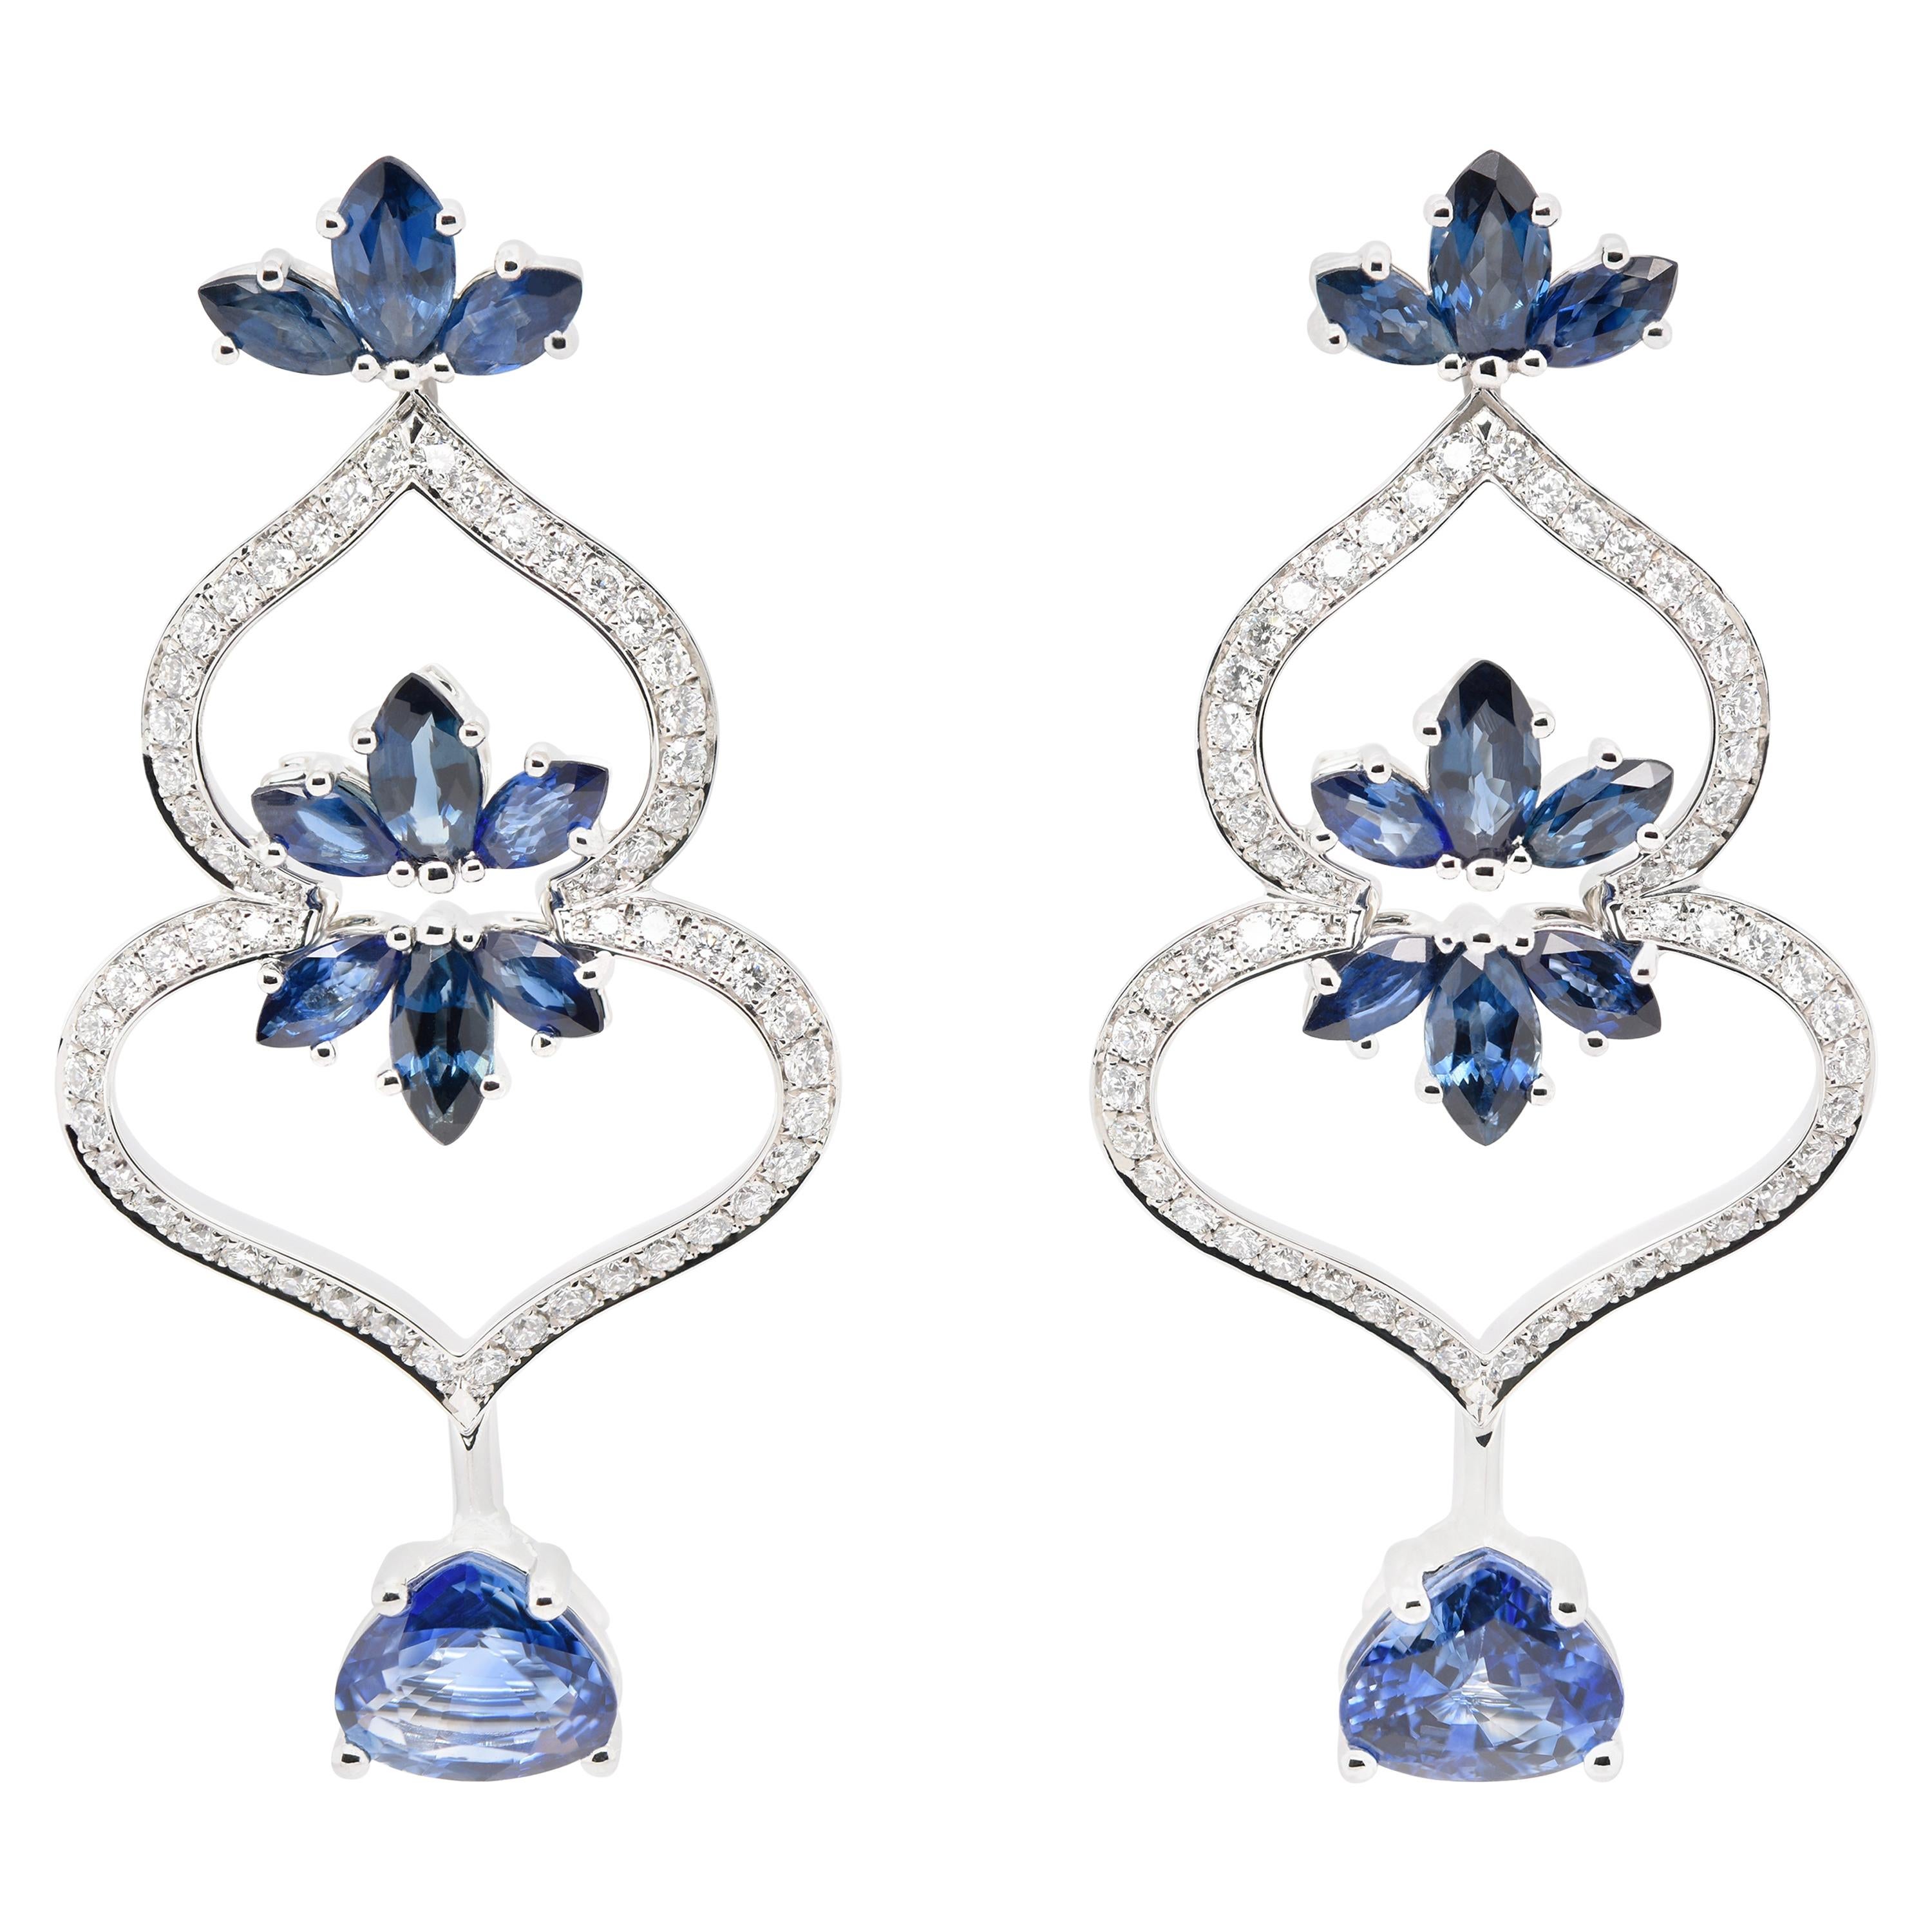 JAG New York Sapphire and Diamond Earrings in Platinum Shaped Like Spades For Sale